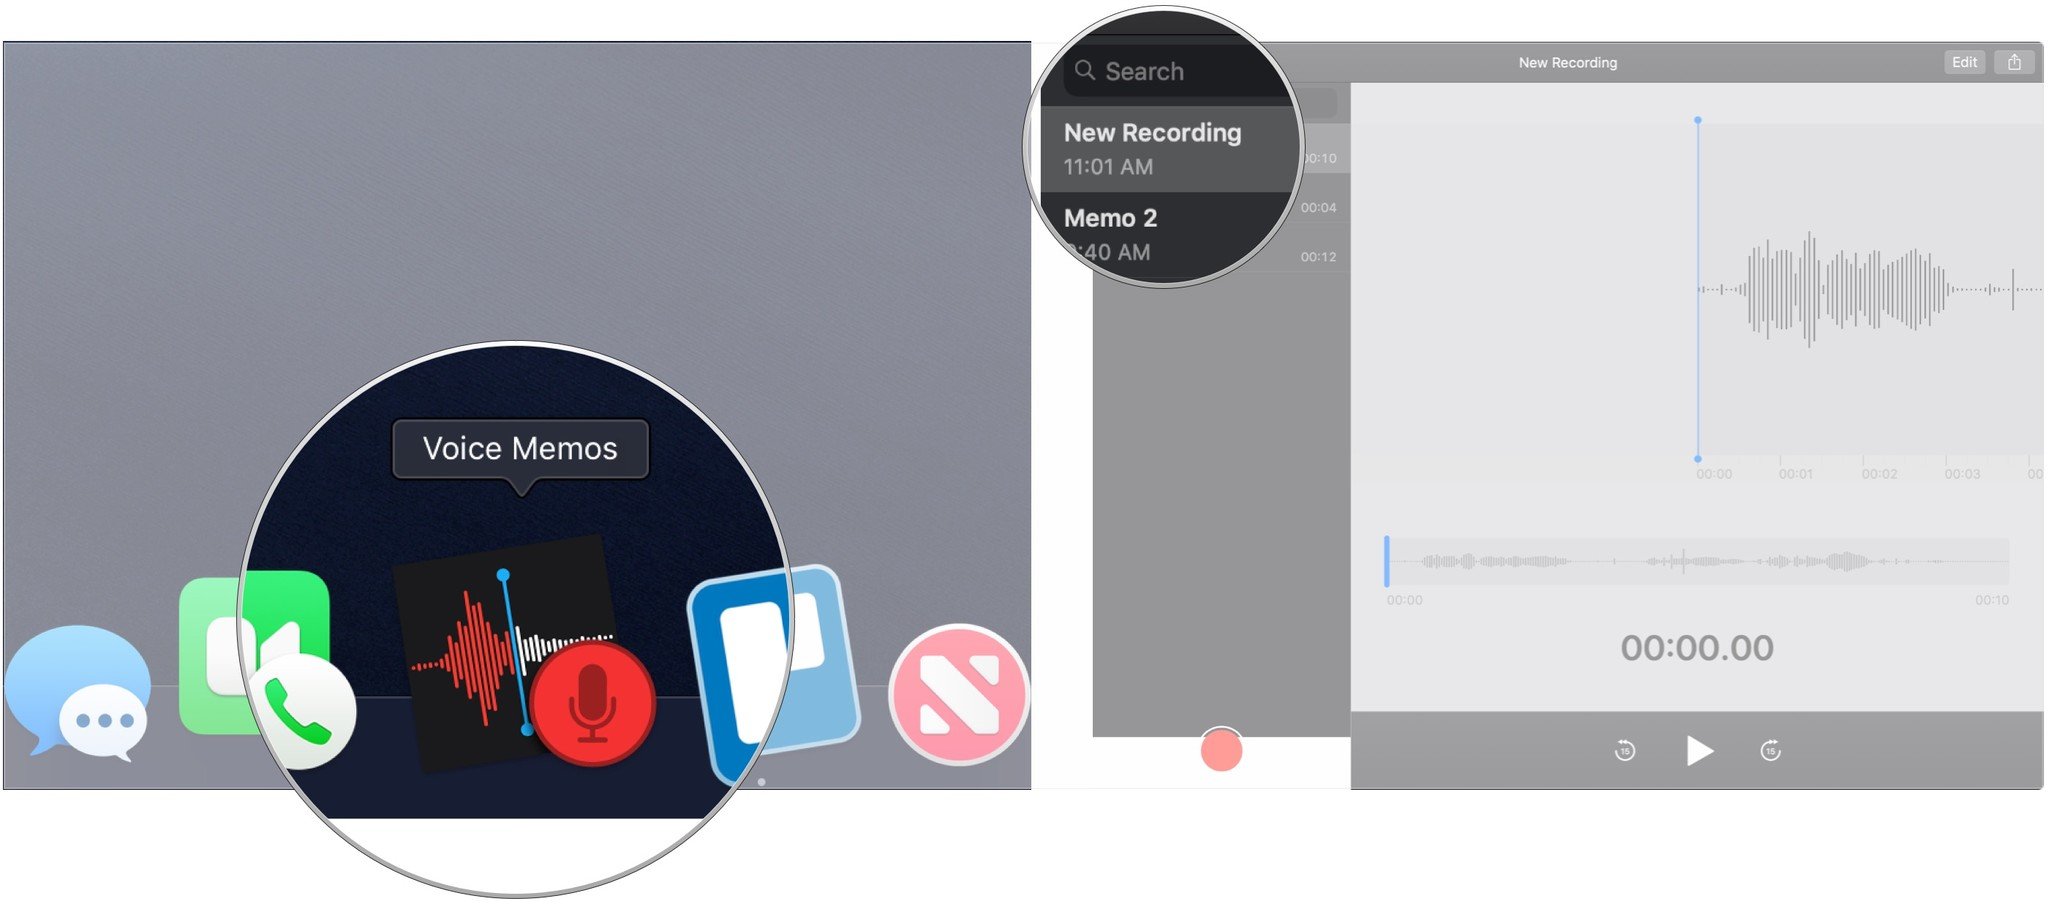 How to use Voice Memos on Mac | iMore